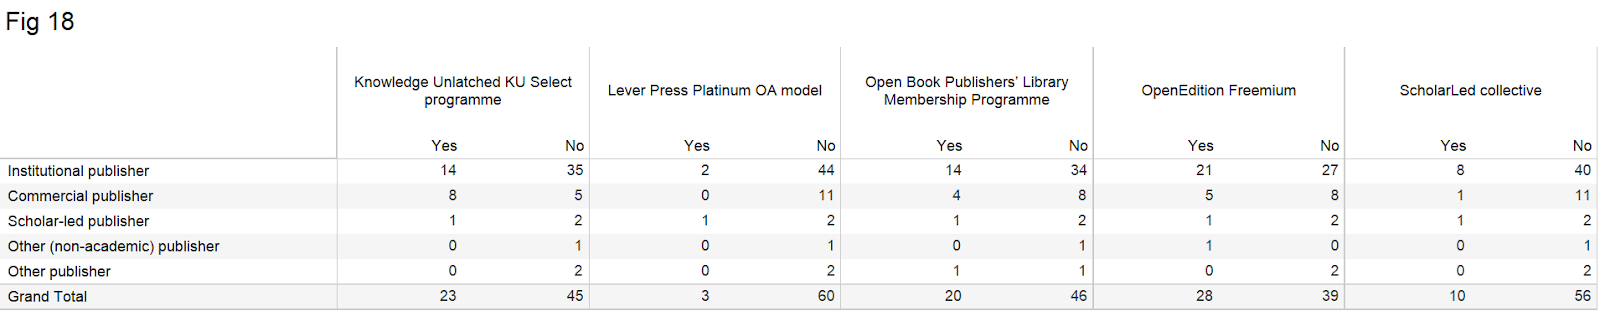 Figure showing that institutional publishers are most aware of OpenEdition while commercial publishers are more aware of Knowledge Unlatched